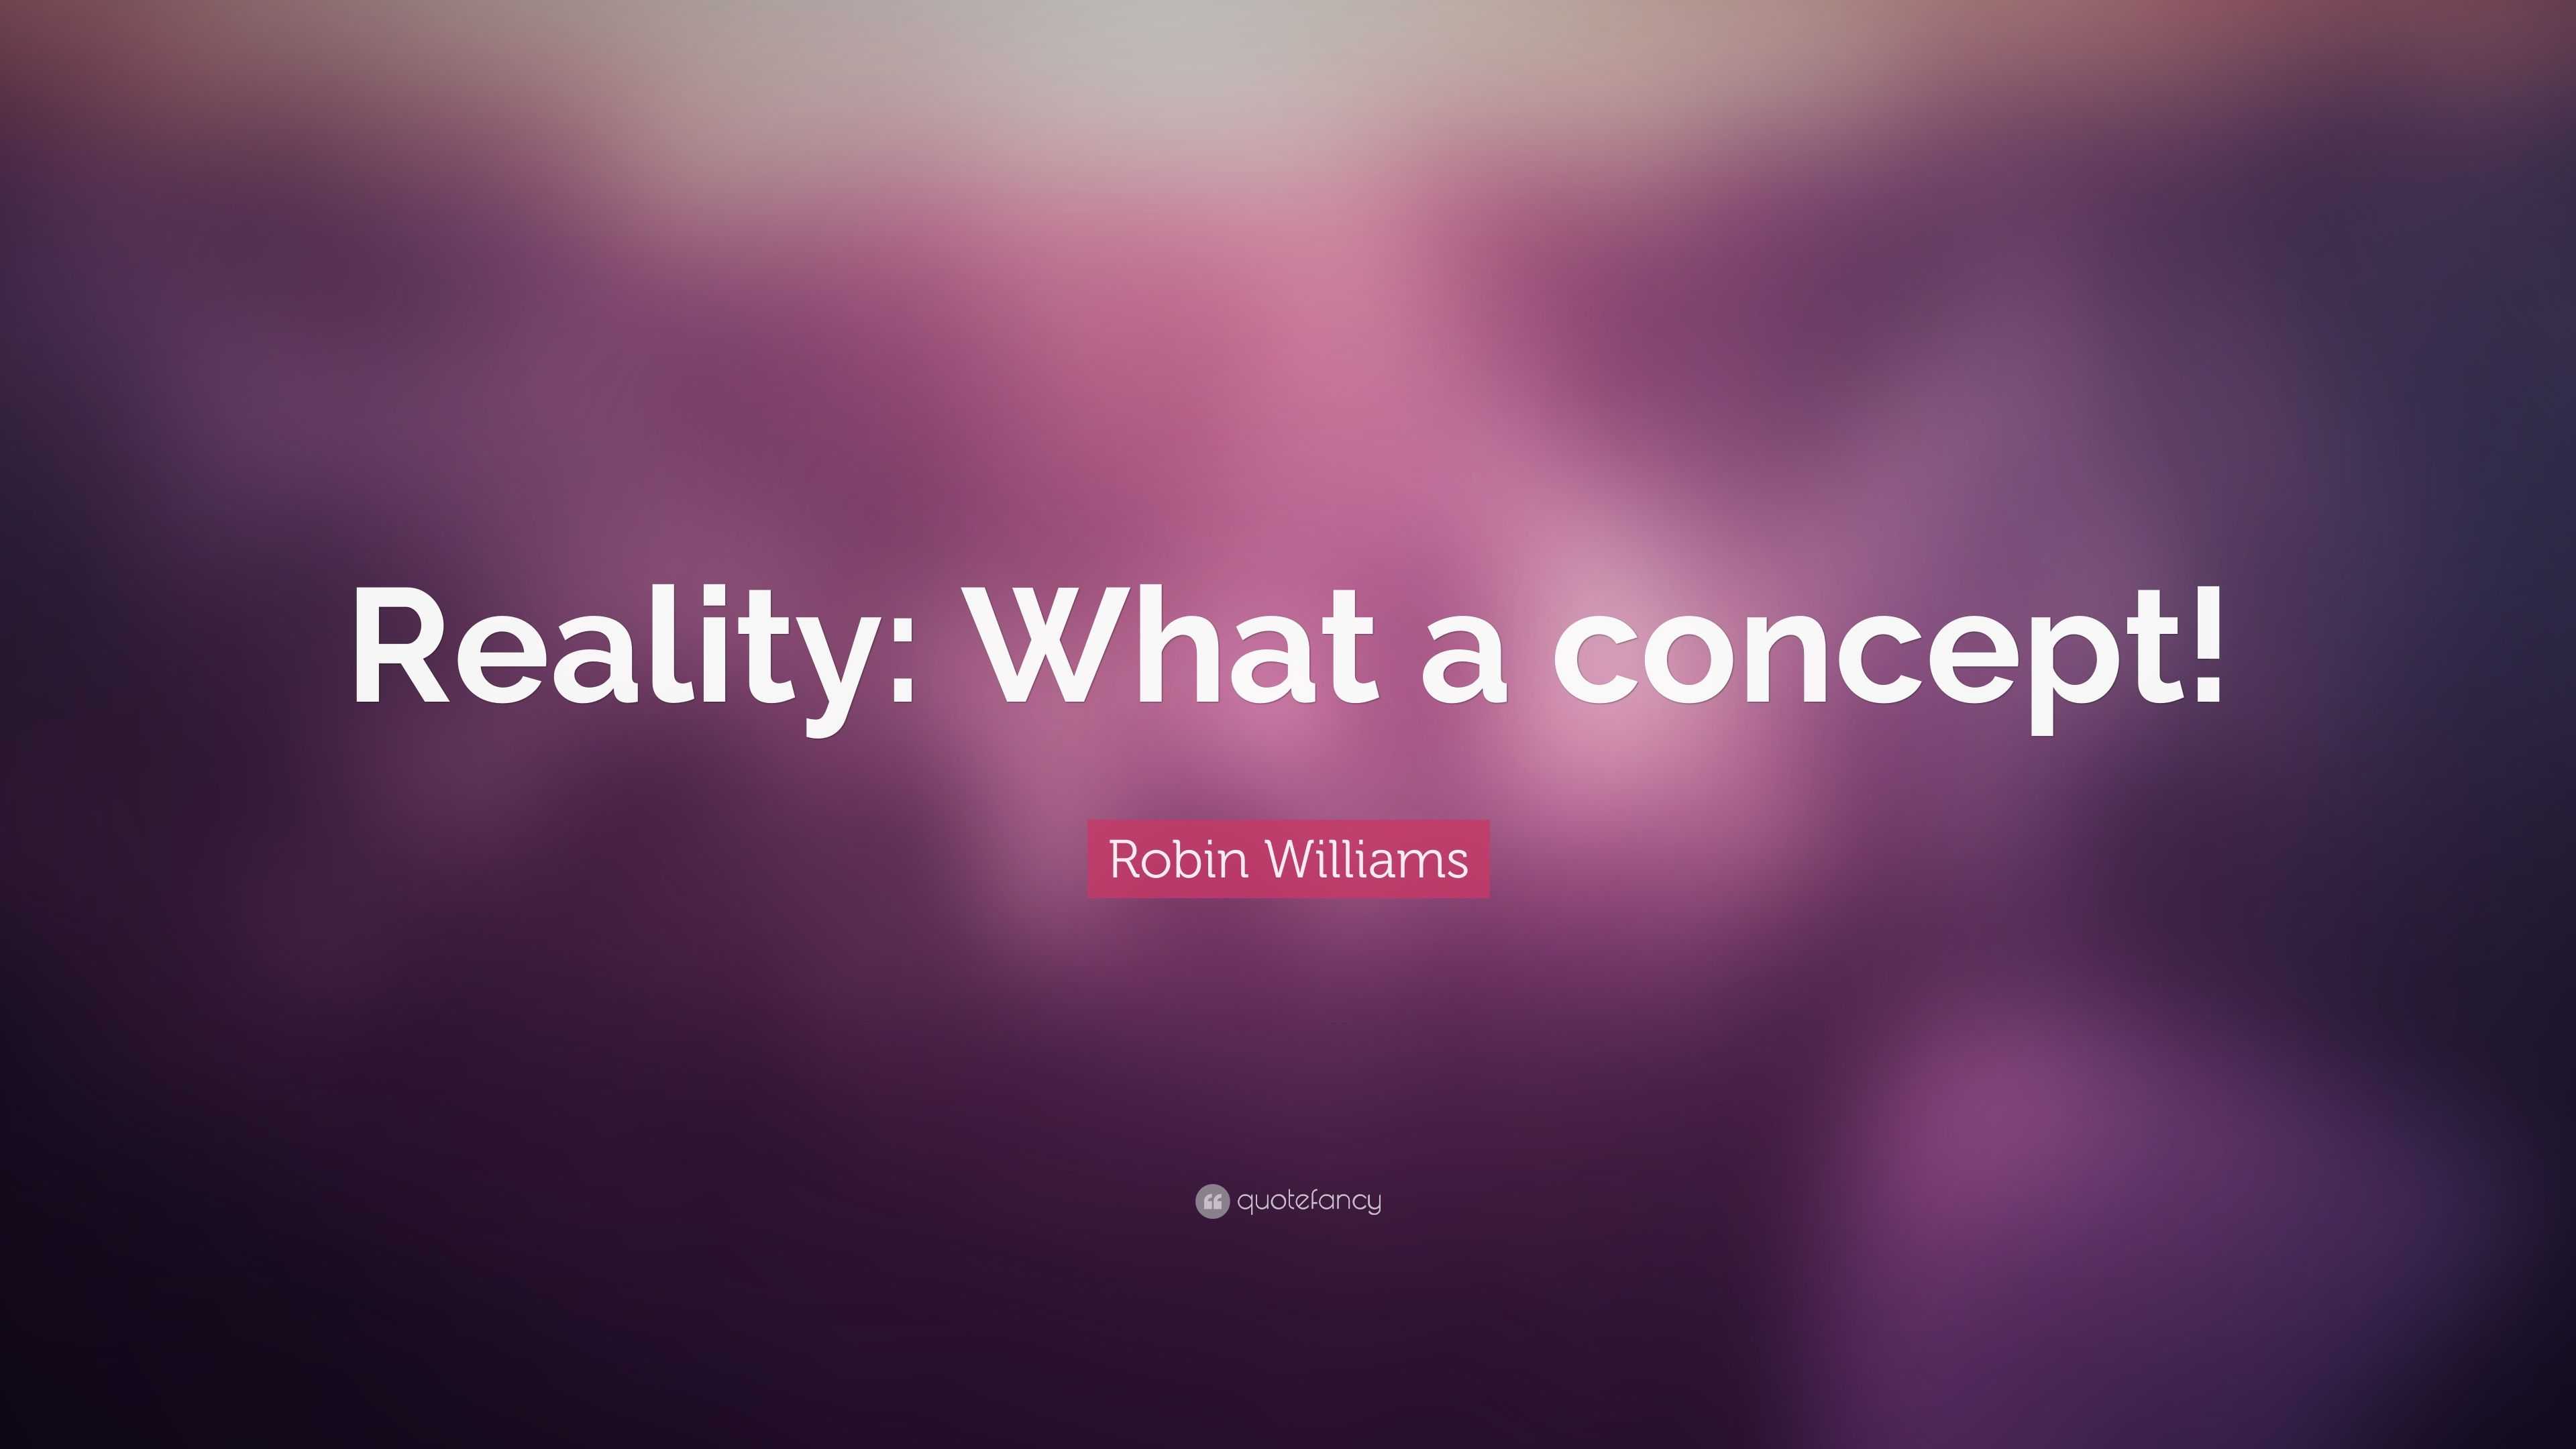 4821583-Robin-Williams-Quote-Reality-What-a-concept.jpg